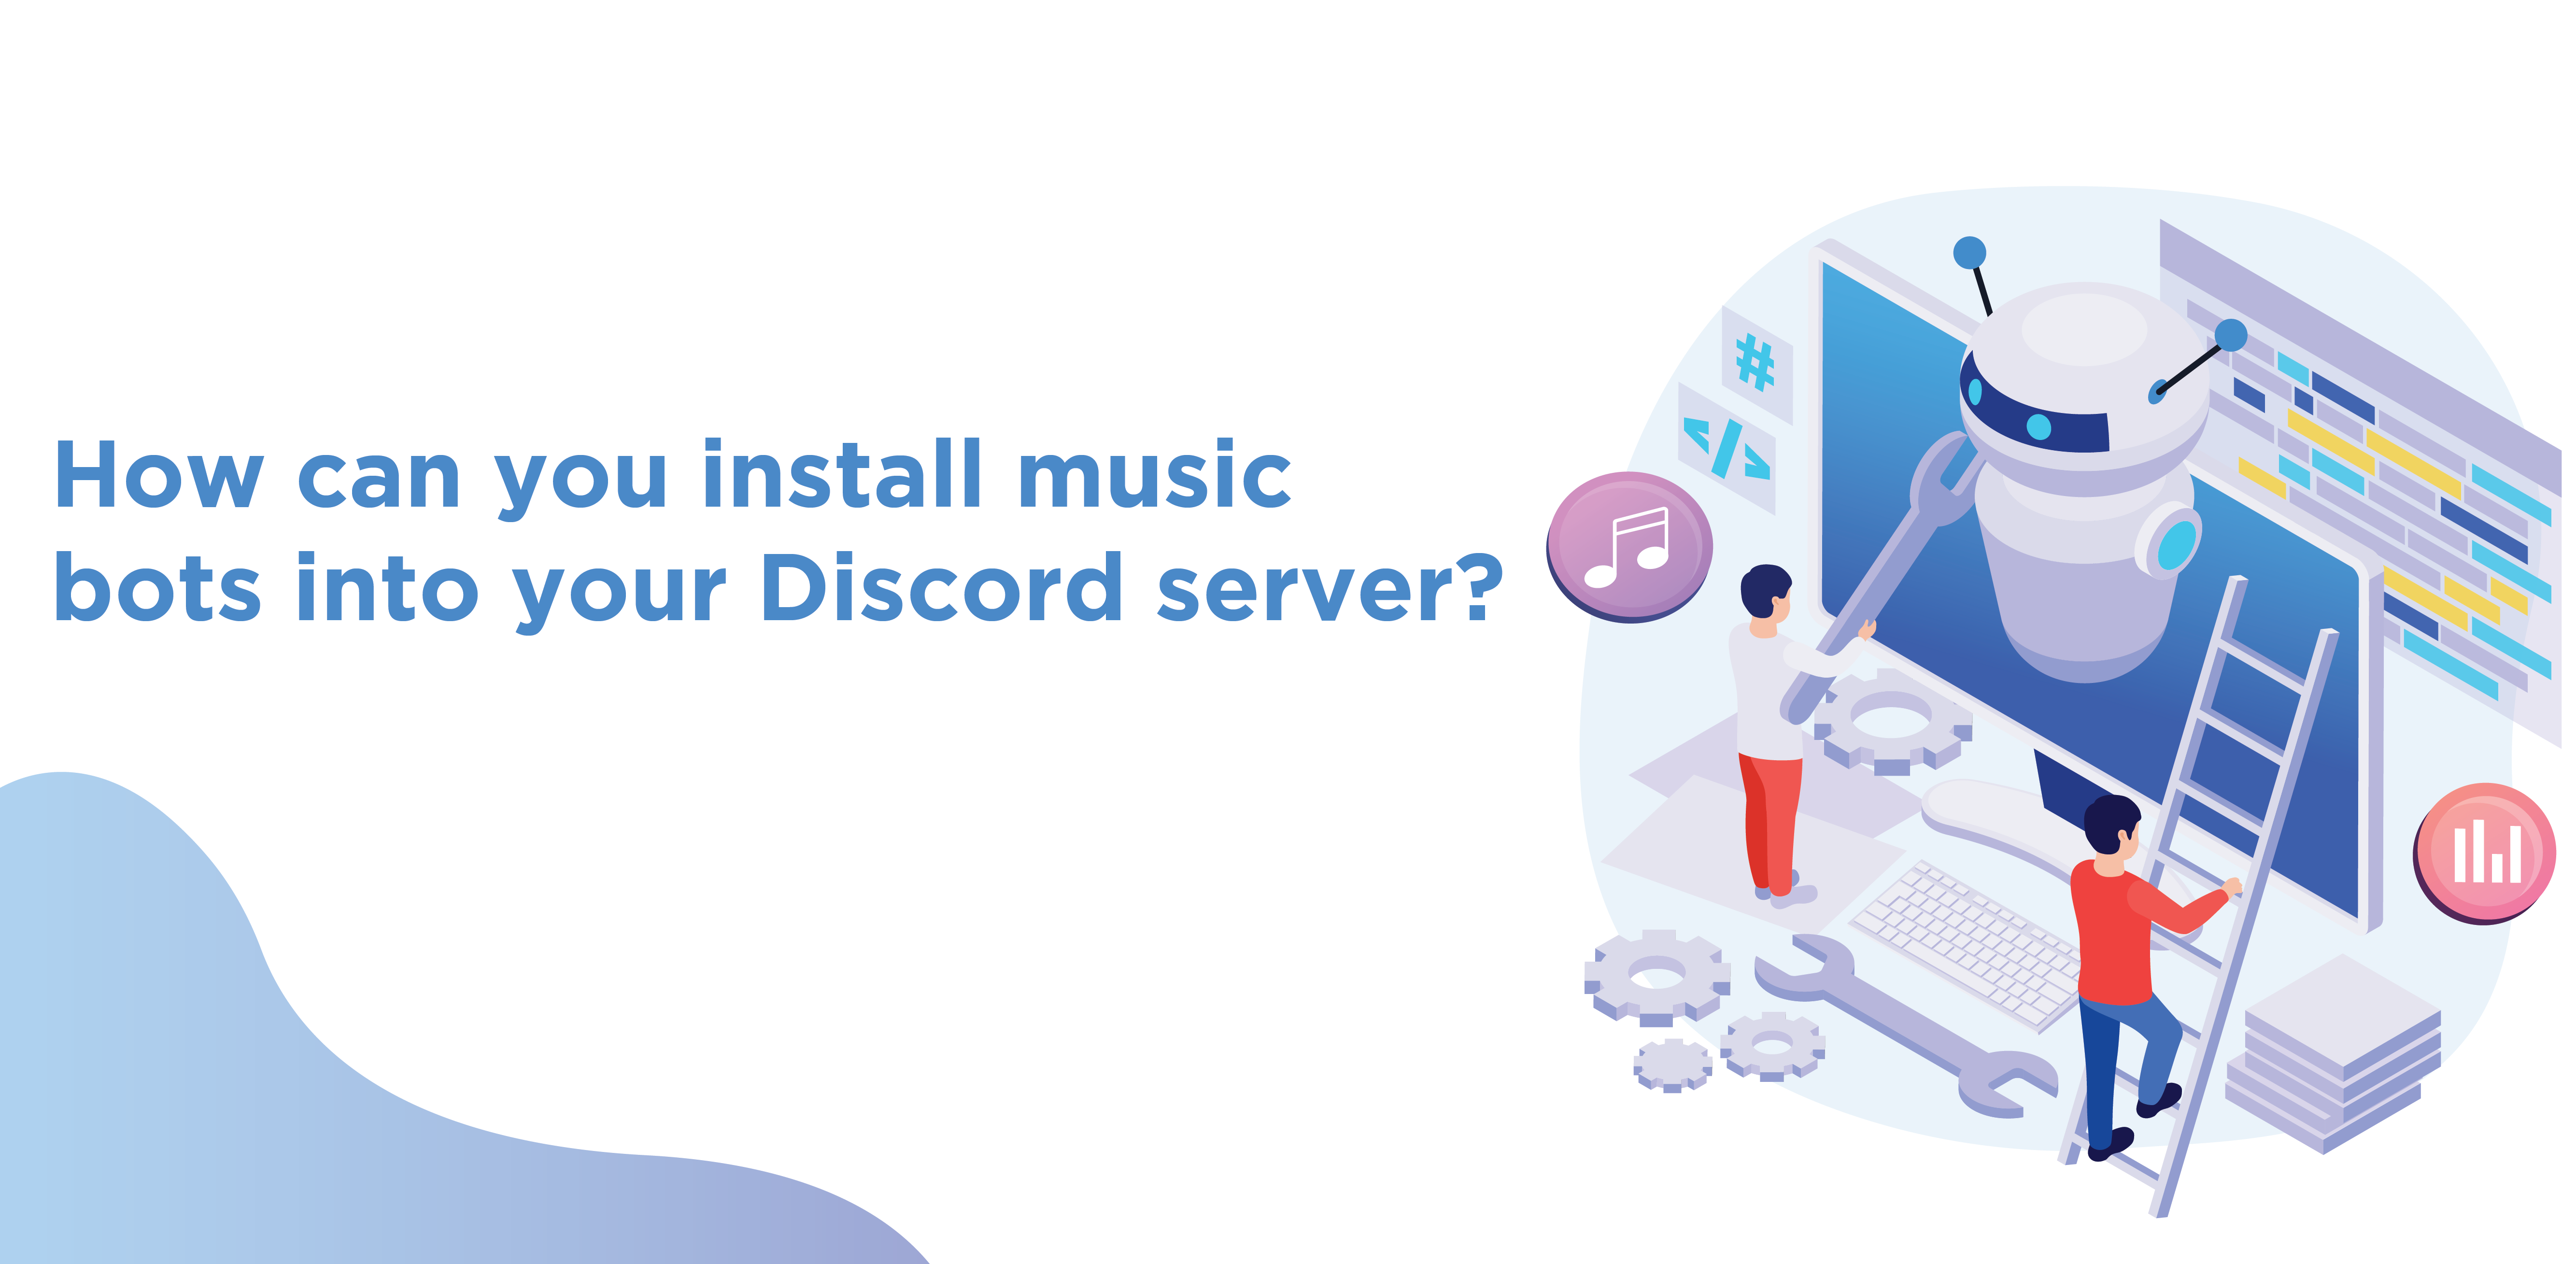 How can you install music bots into your Discord server?